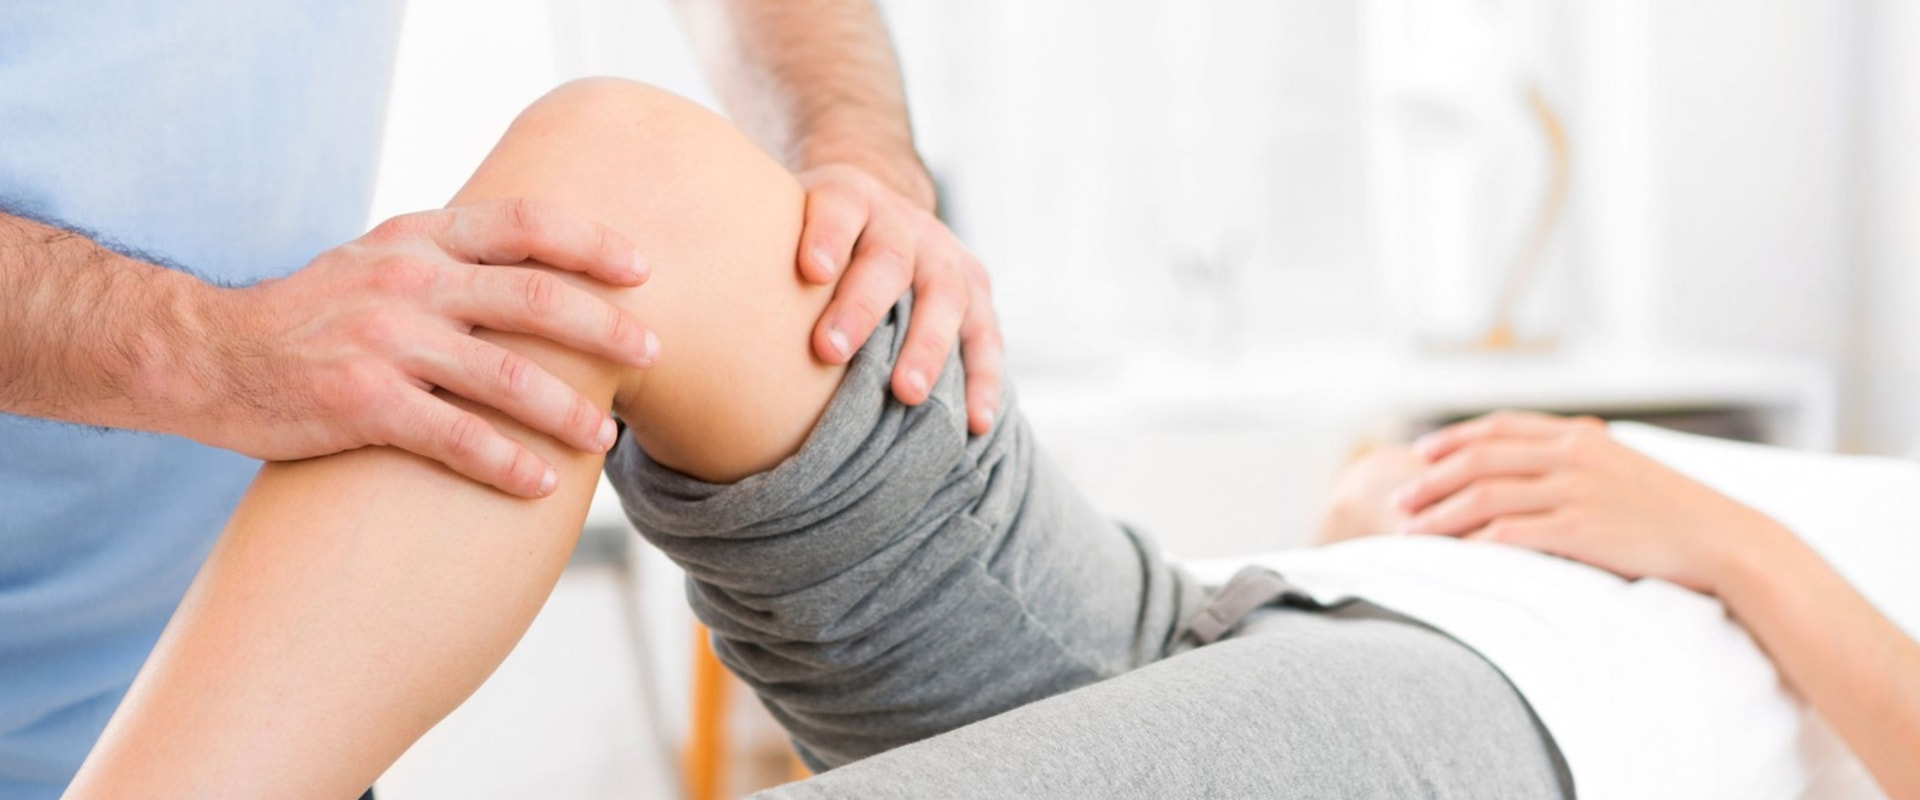 What to Do When Physical Therapy Doesn't Work